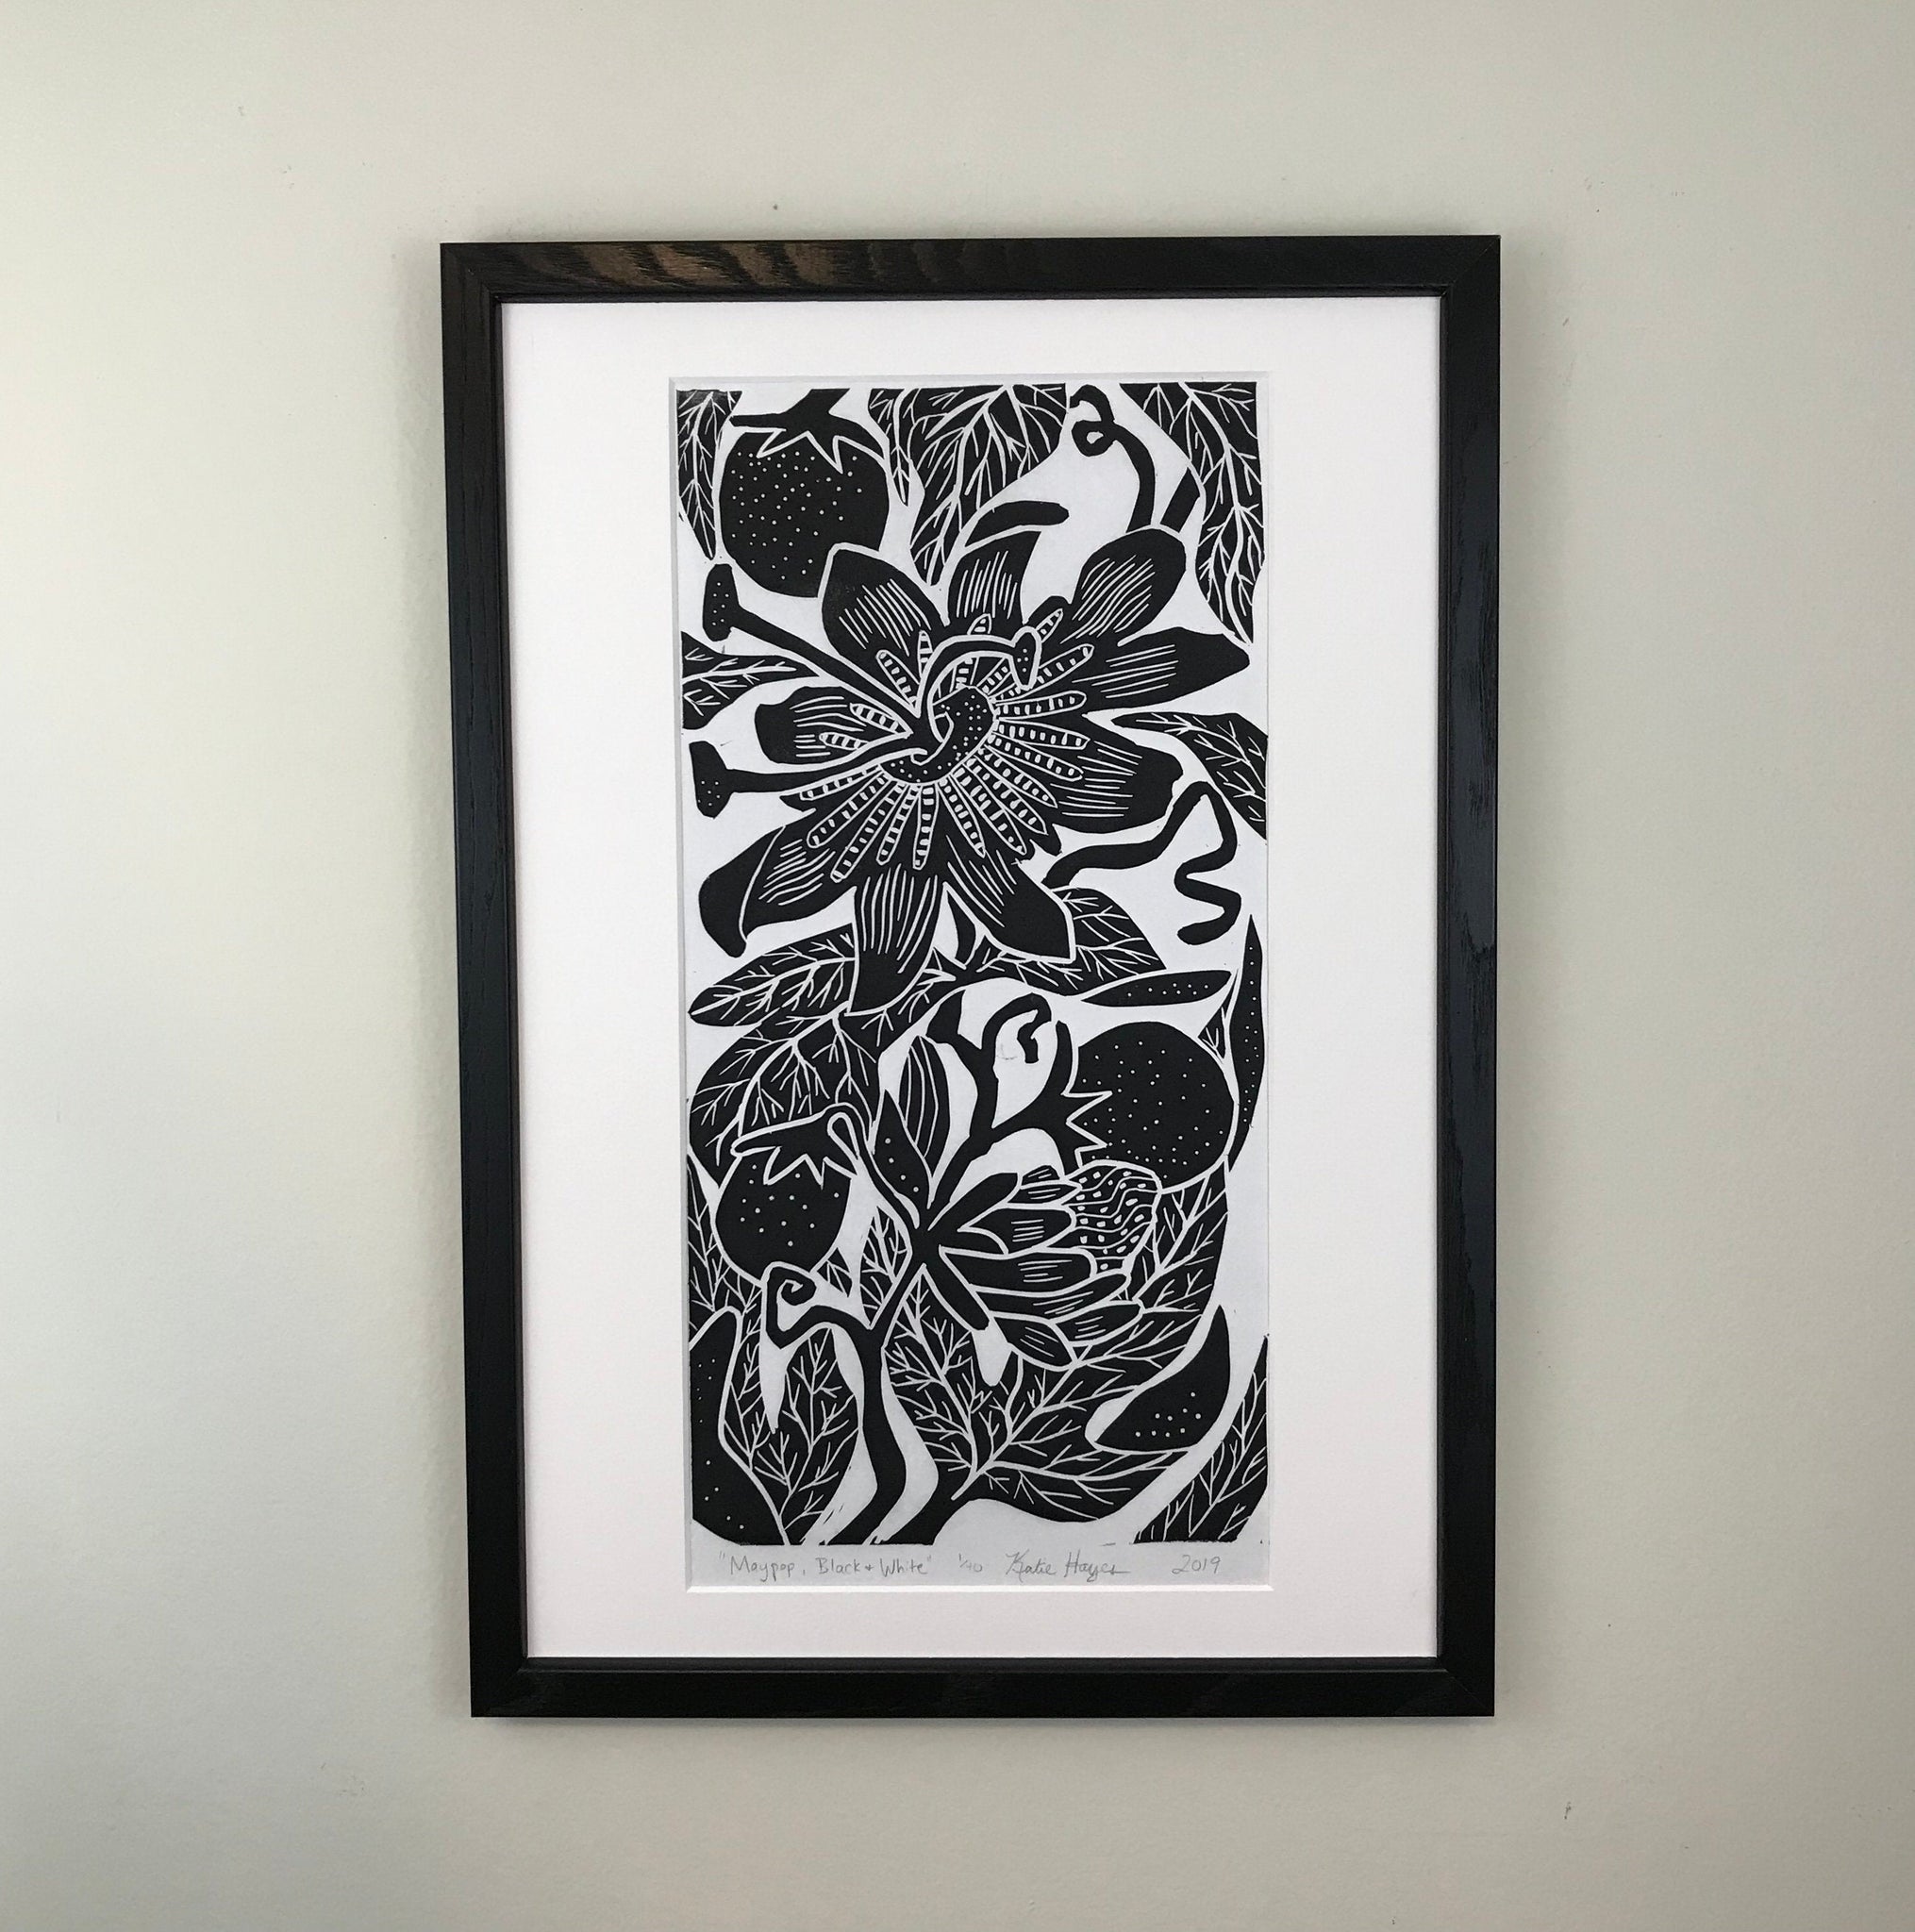 Maypop, limited edition black and white block print. Hand pulled